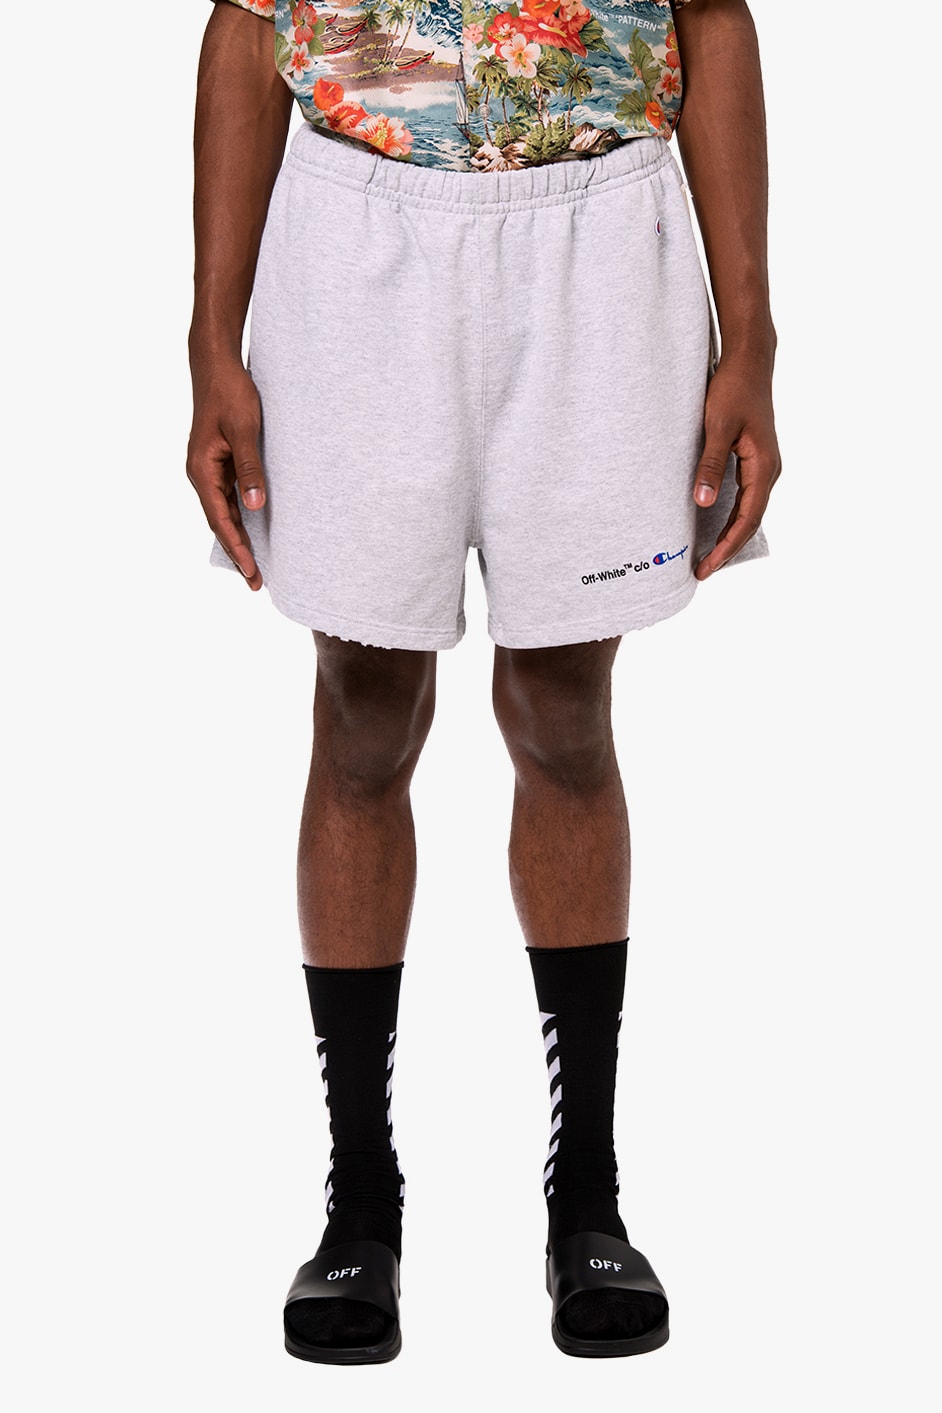 Off-White c/o Virgil Abloh Knee-length shorts and long shorts for